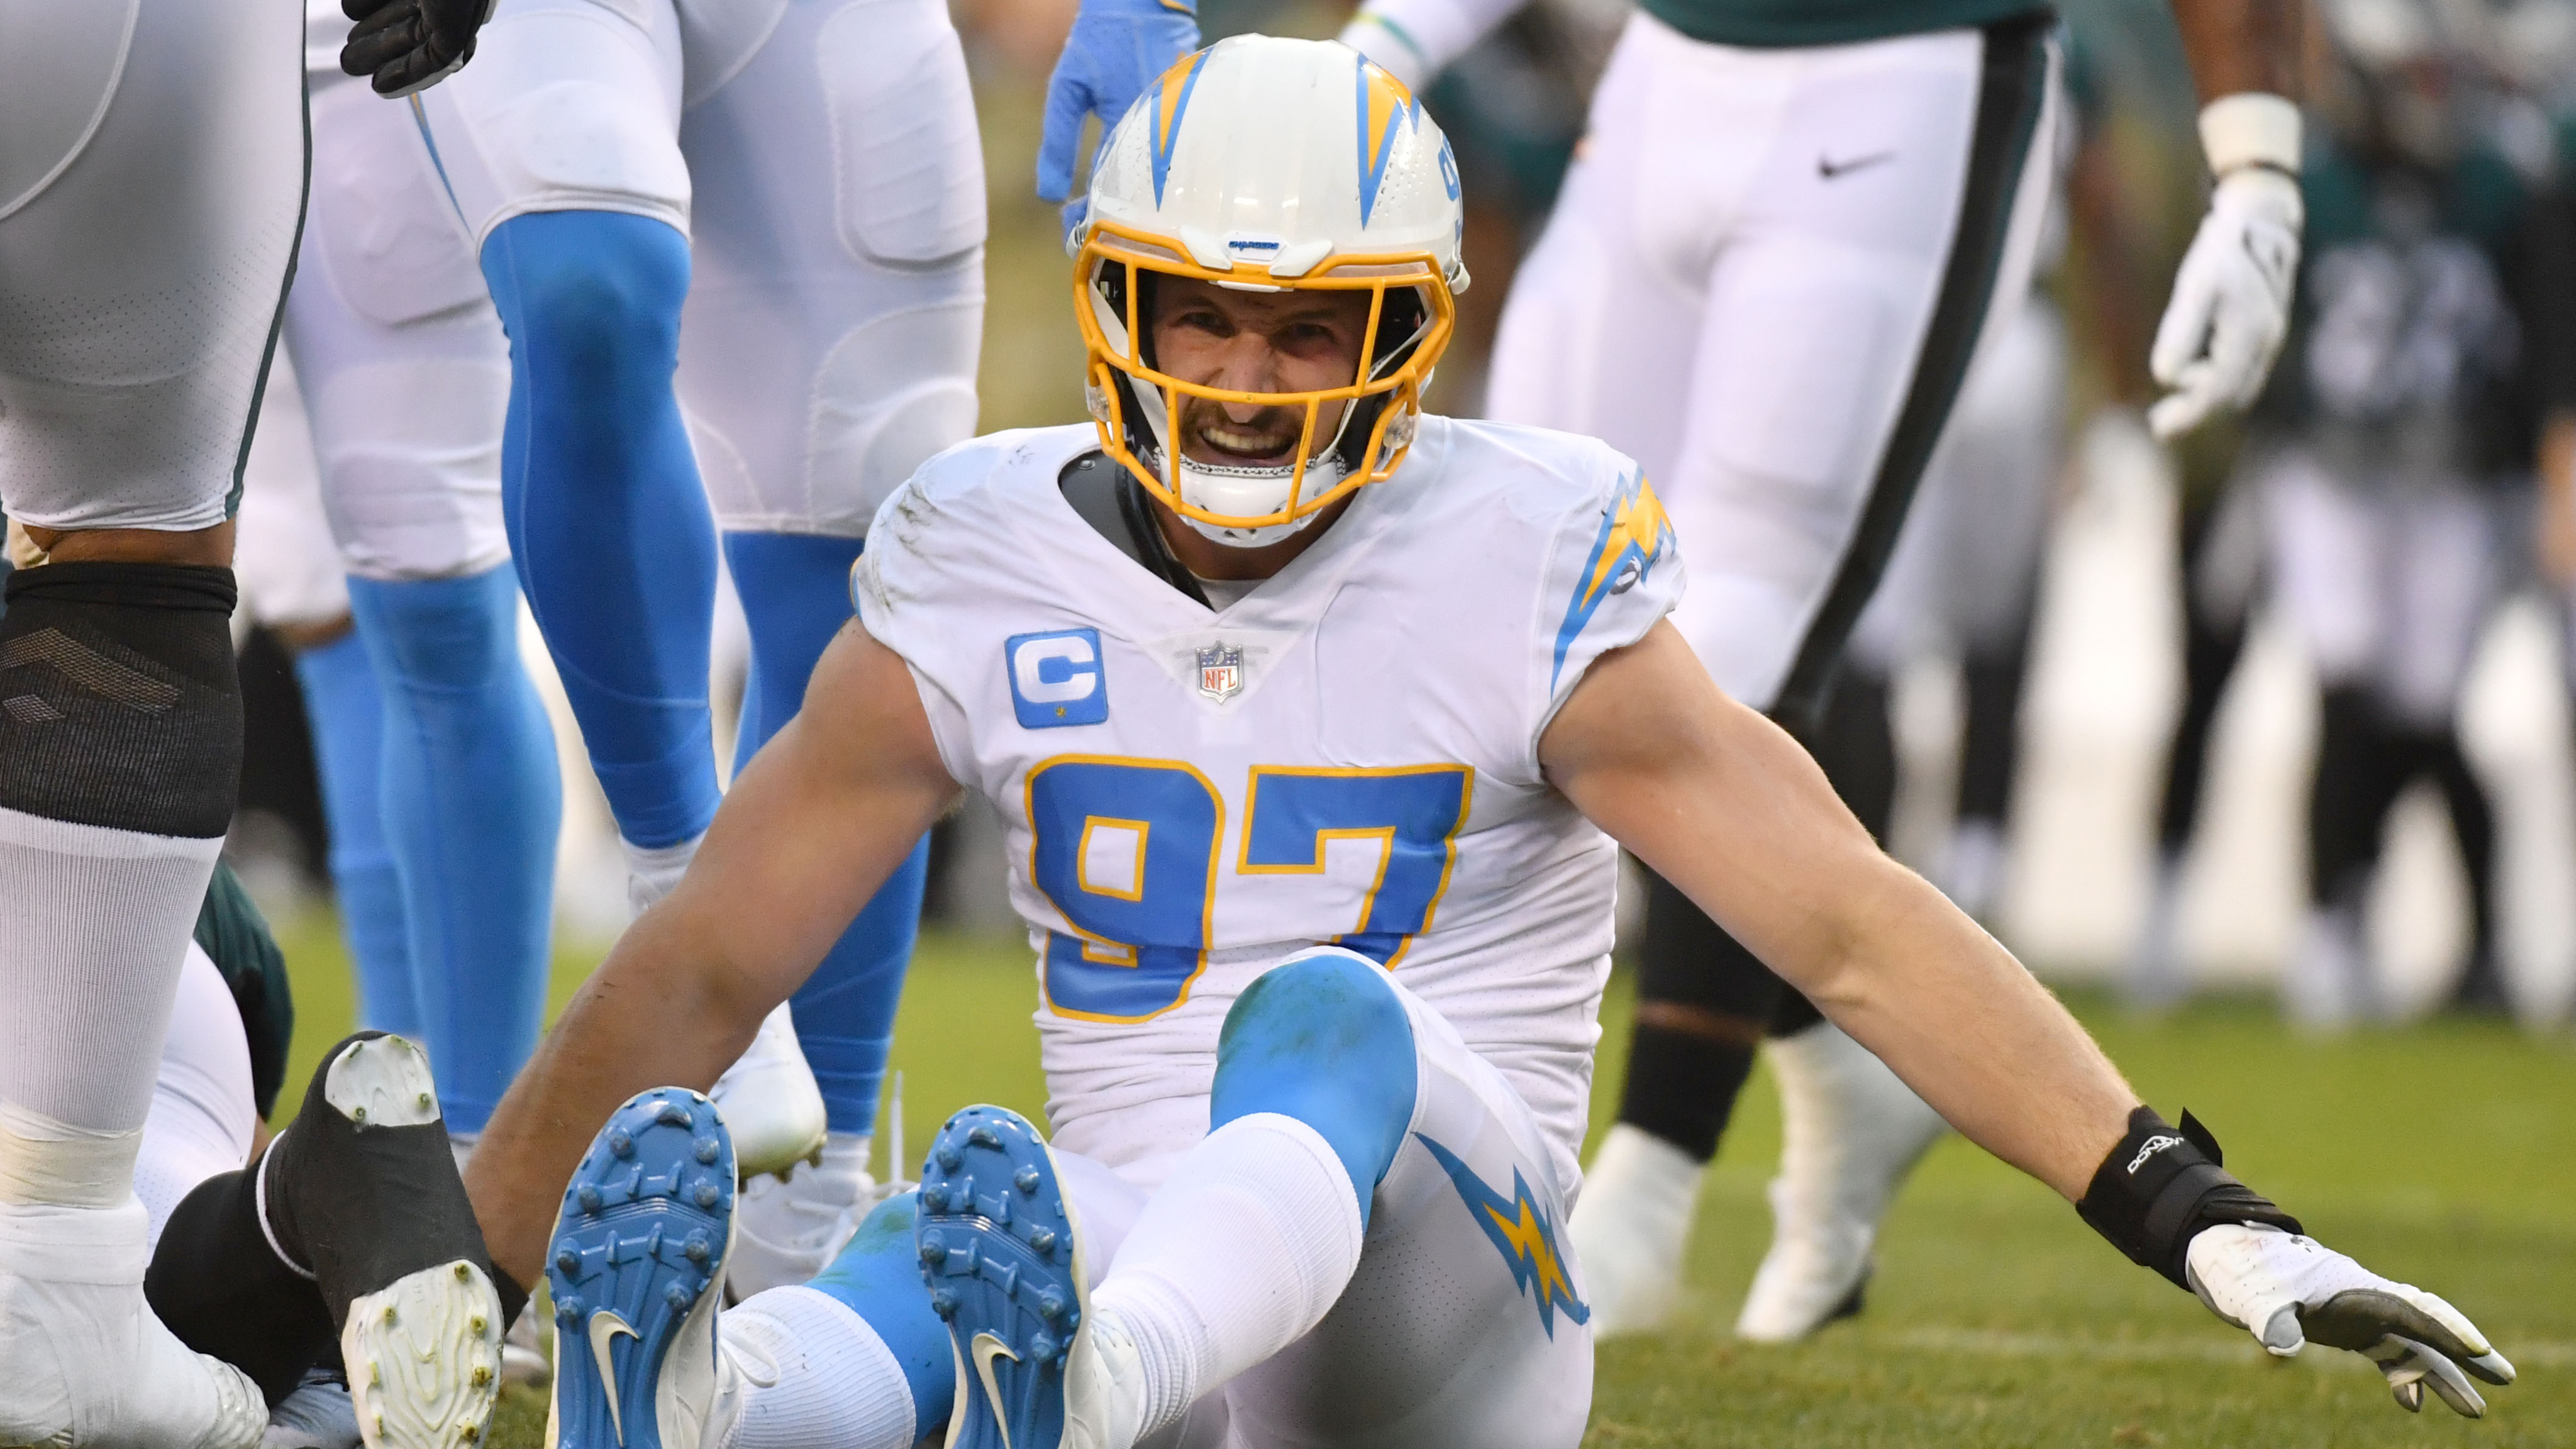 Eagles Fans Rattle Chargers' Joey Bosa At NFC Championship